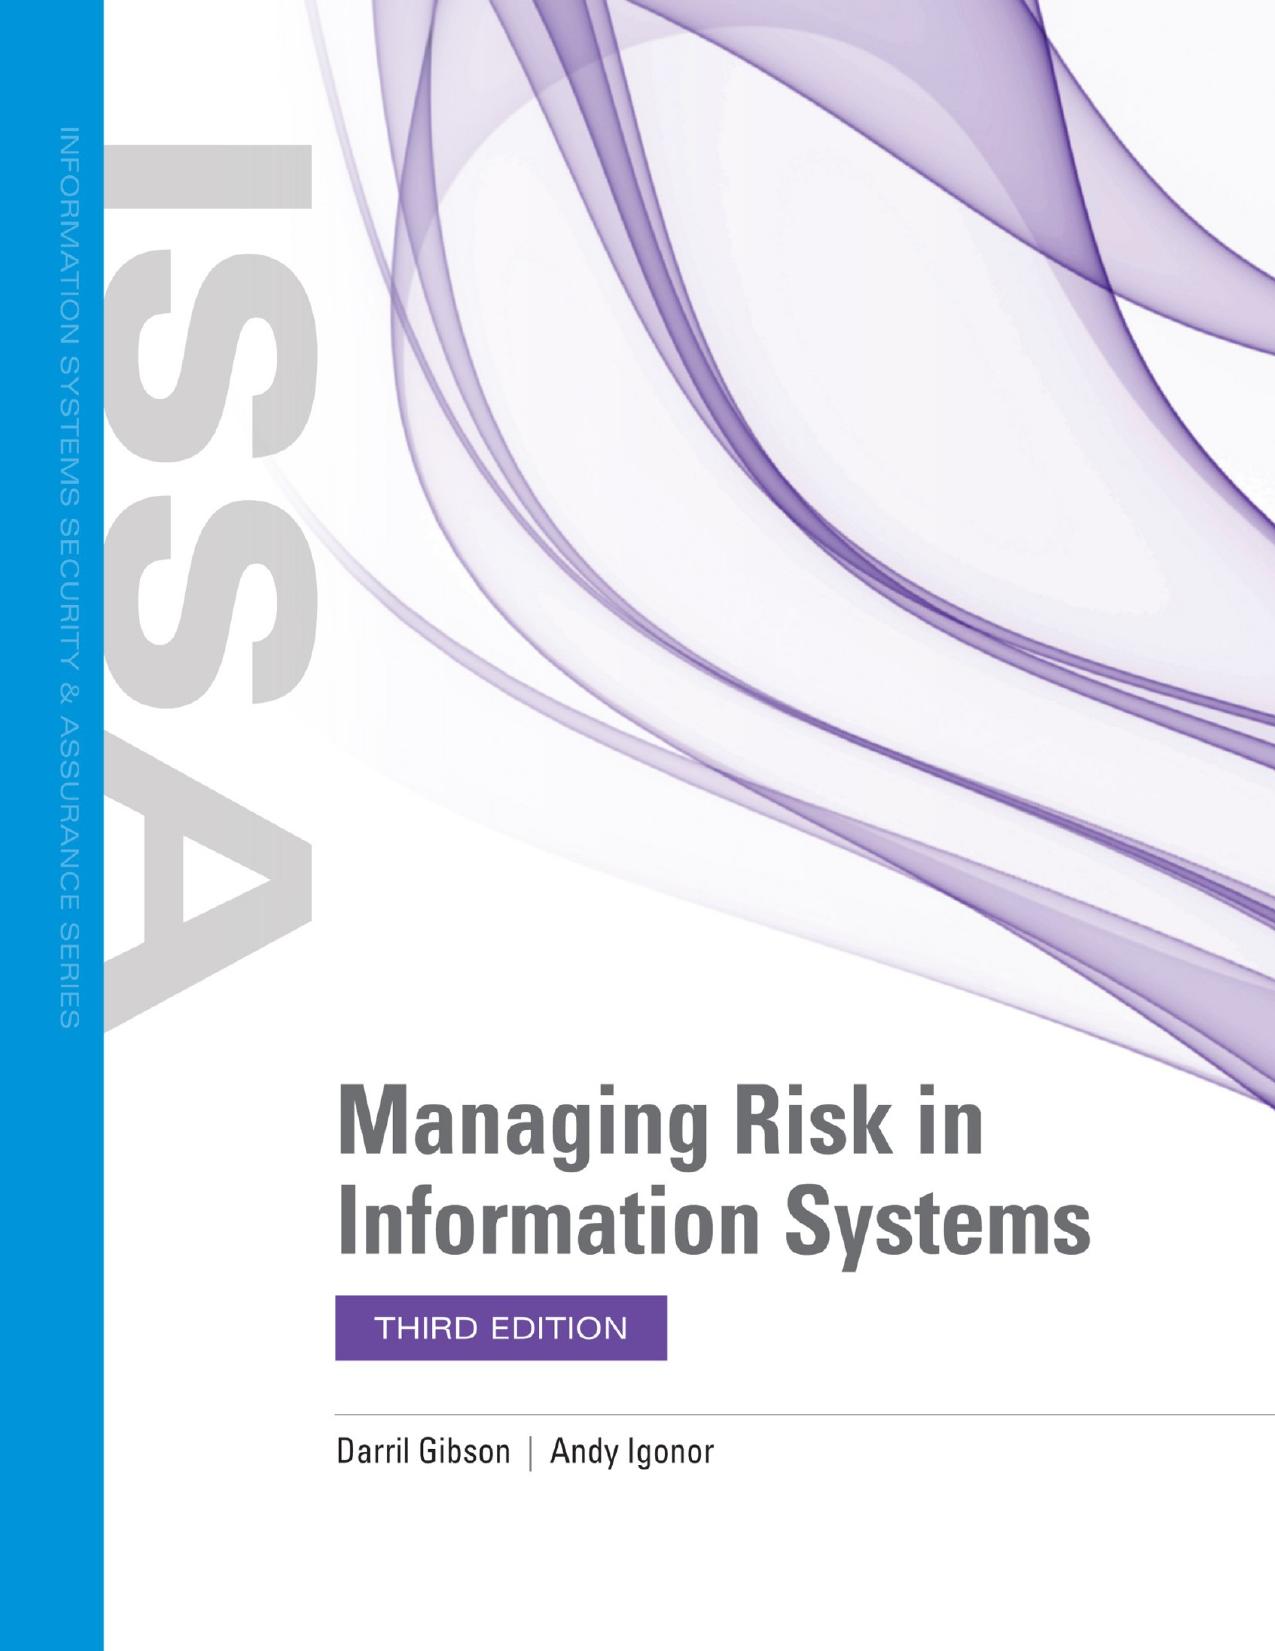 (eBook PDF)Managing Risk in Information Systems, 3rd Edition by Darril Gibson, Andy Igonor